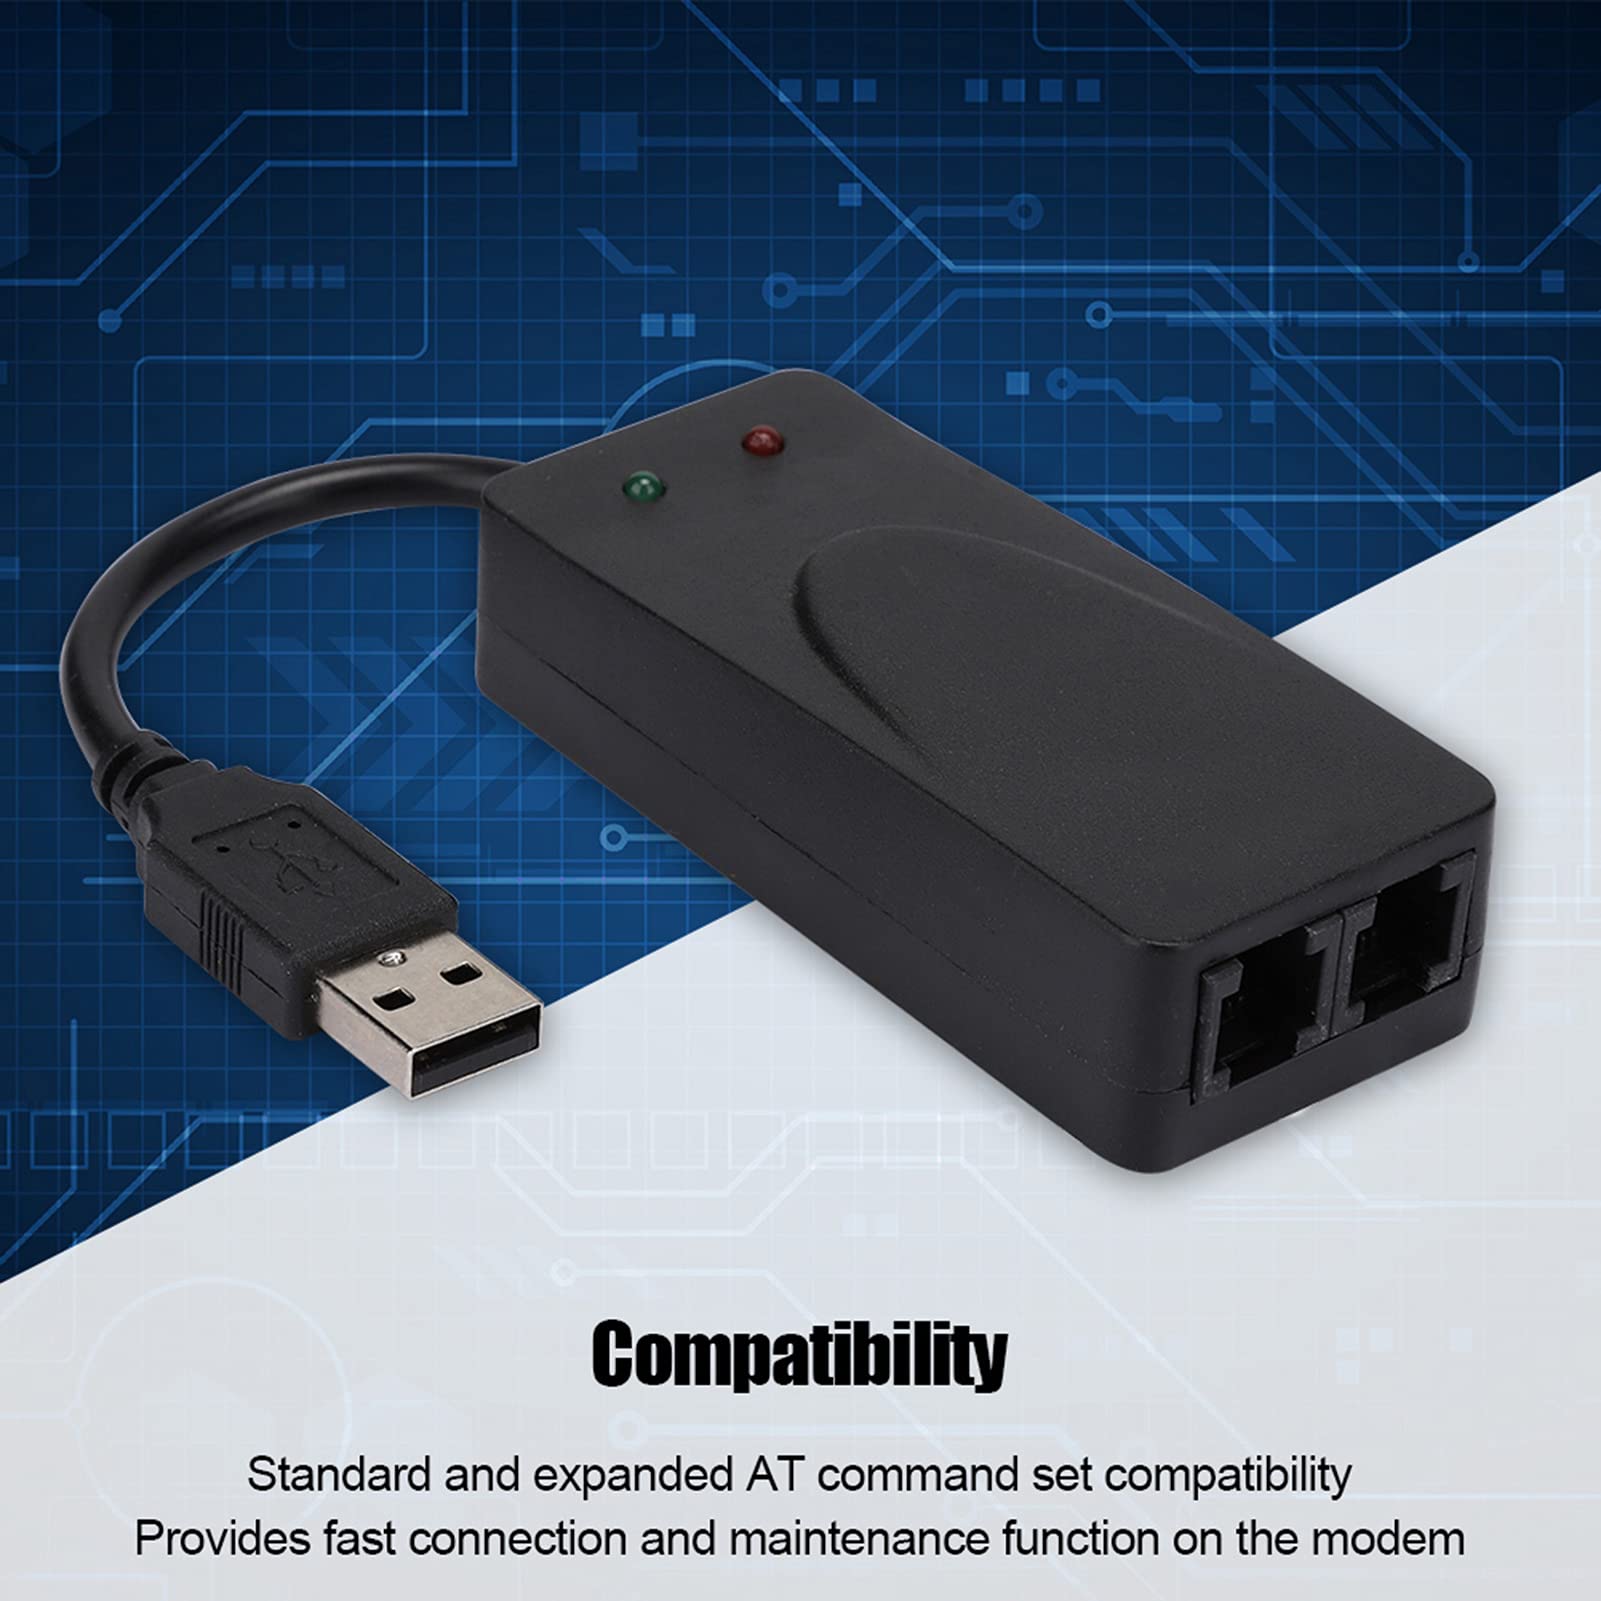 Fax Modem, Convenient External USB 2.0 56K Modem with Compatible at and Extended at Command Sets for Win 7/Win 8/Win 10/Win XP